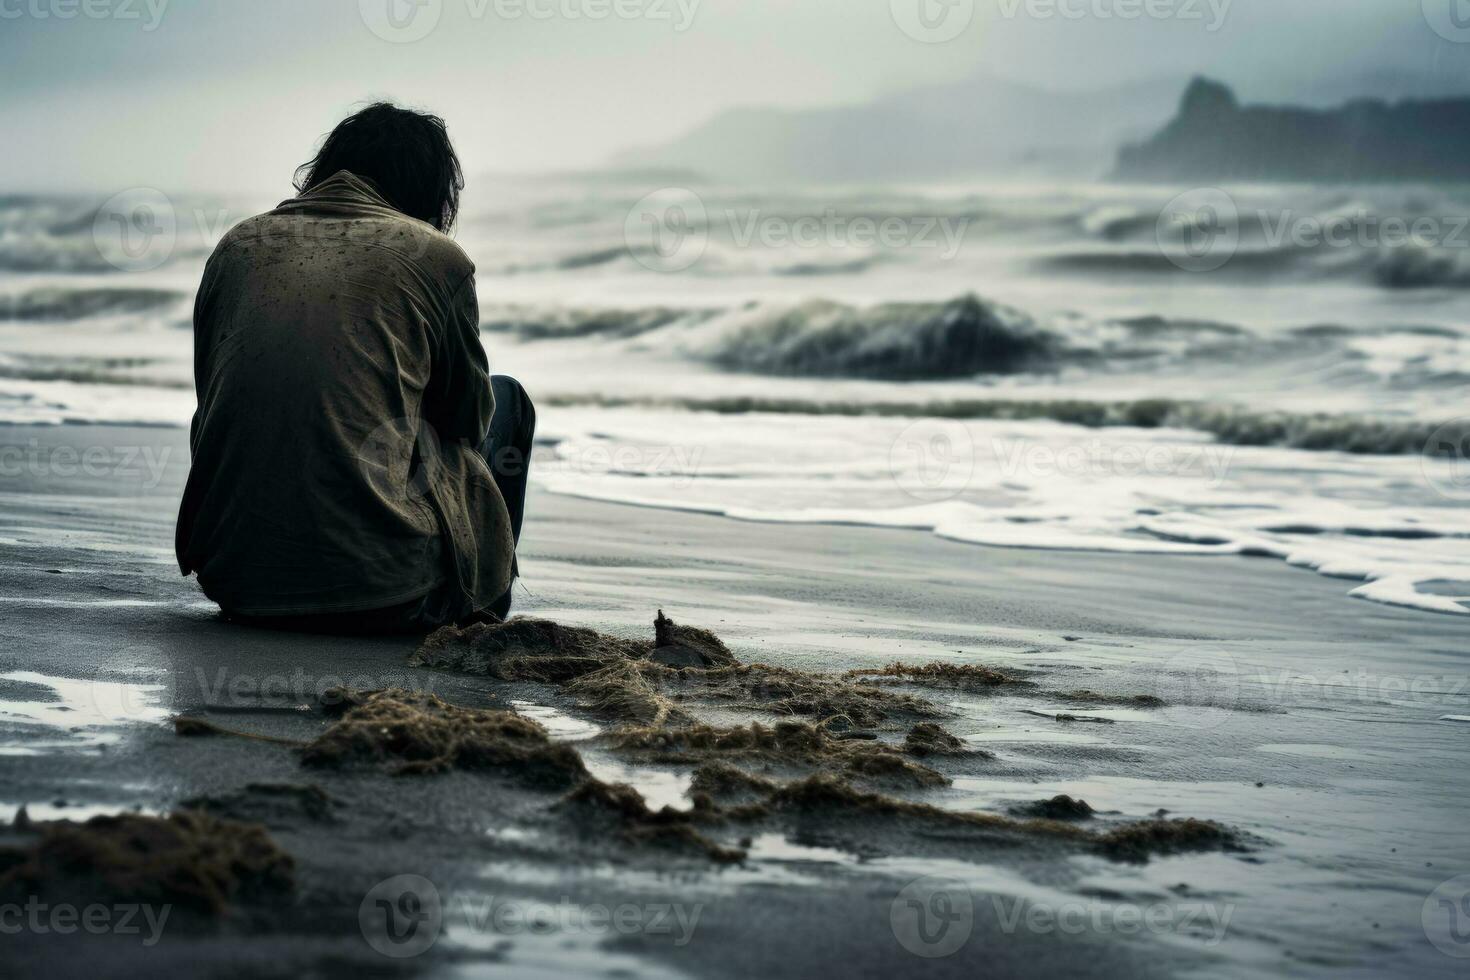 Distressed individual sitting alone displaying sadness on an eerily quiet beach photo